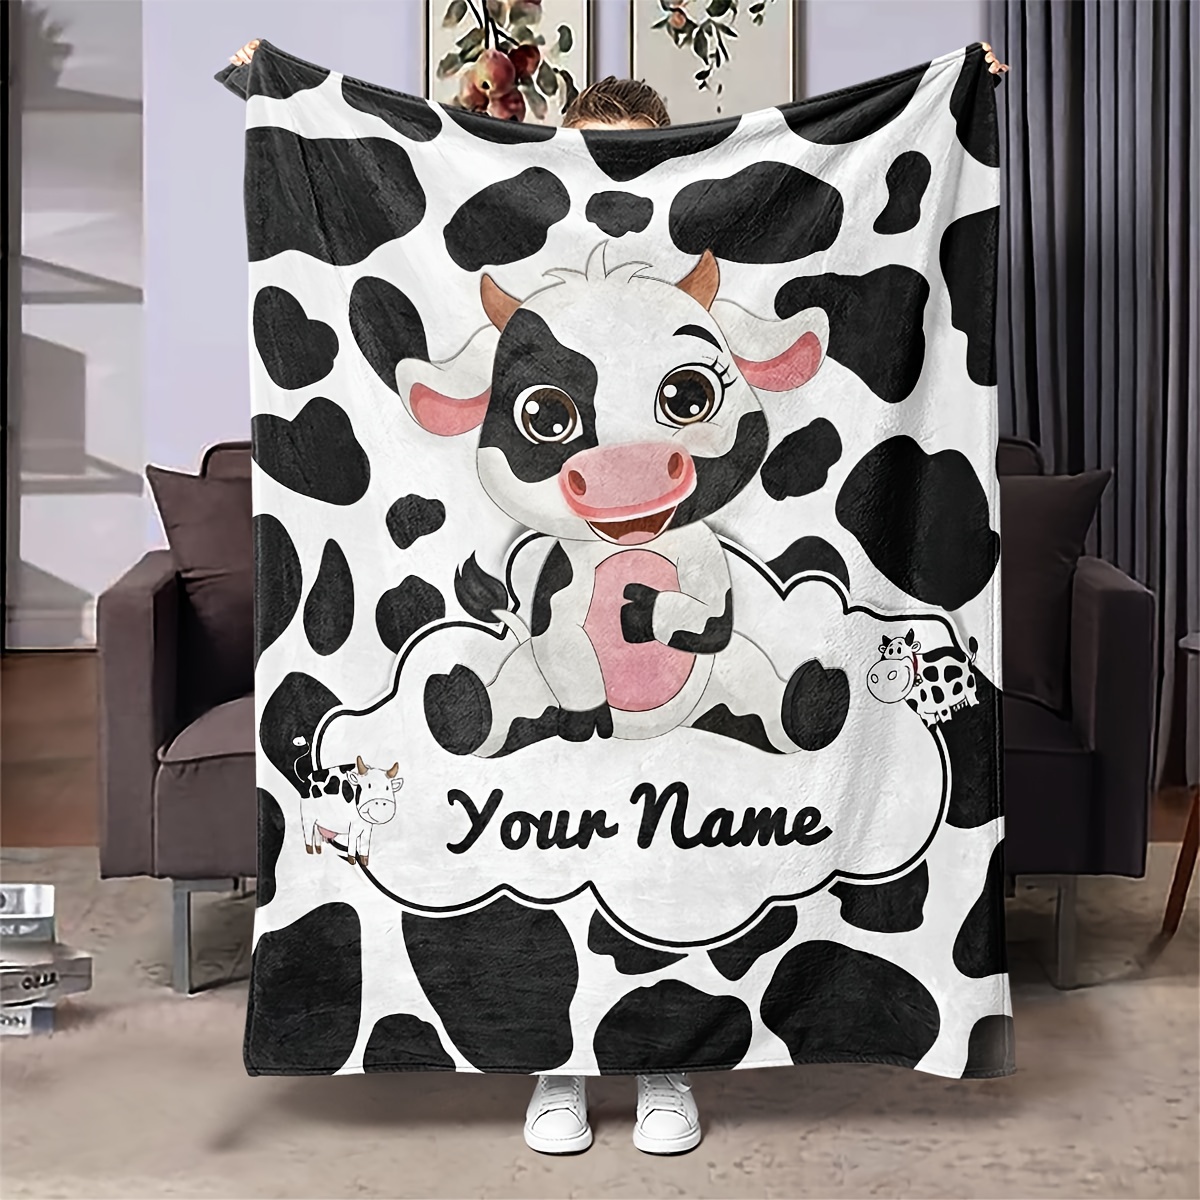 

Customizable Cartoon Cow Print Flannel Blanket - Soft, Warm & Cozy For All Seasons - Perfect Gift With Personalized Text Option